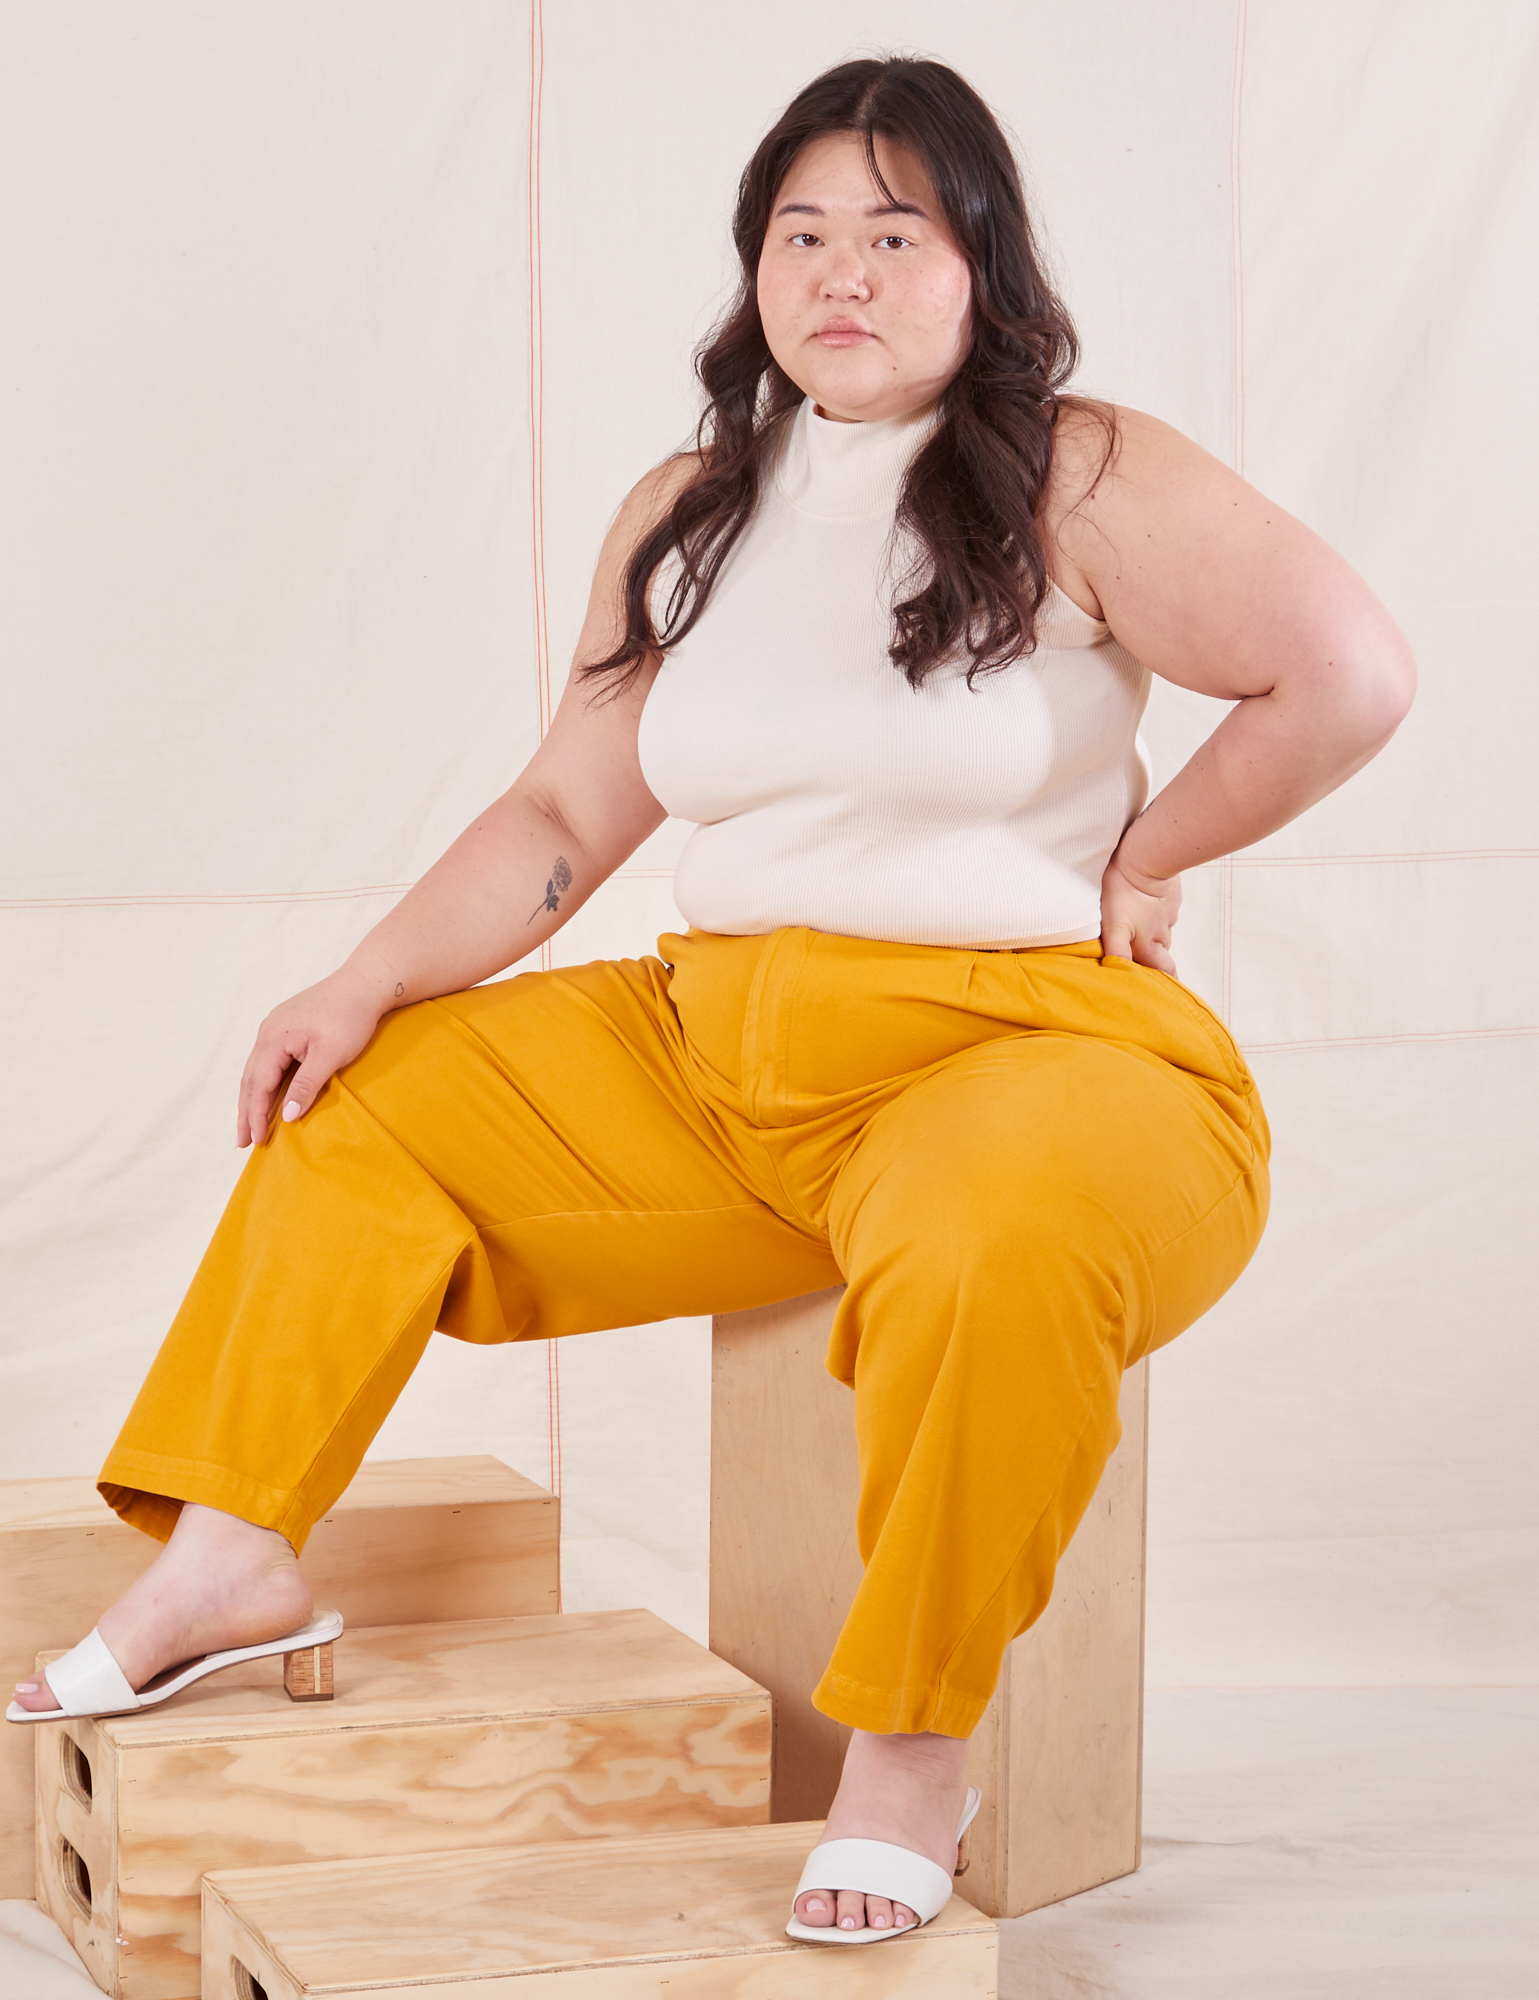 Ashley is sitting on a wooden crate wearing Organic Trousers in Mustard Yellow and Sleeveless Turtleneck in vintage tee off-white